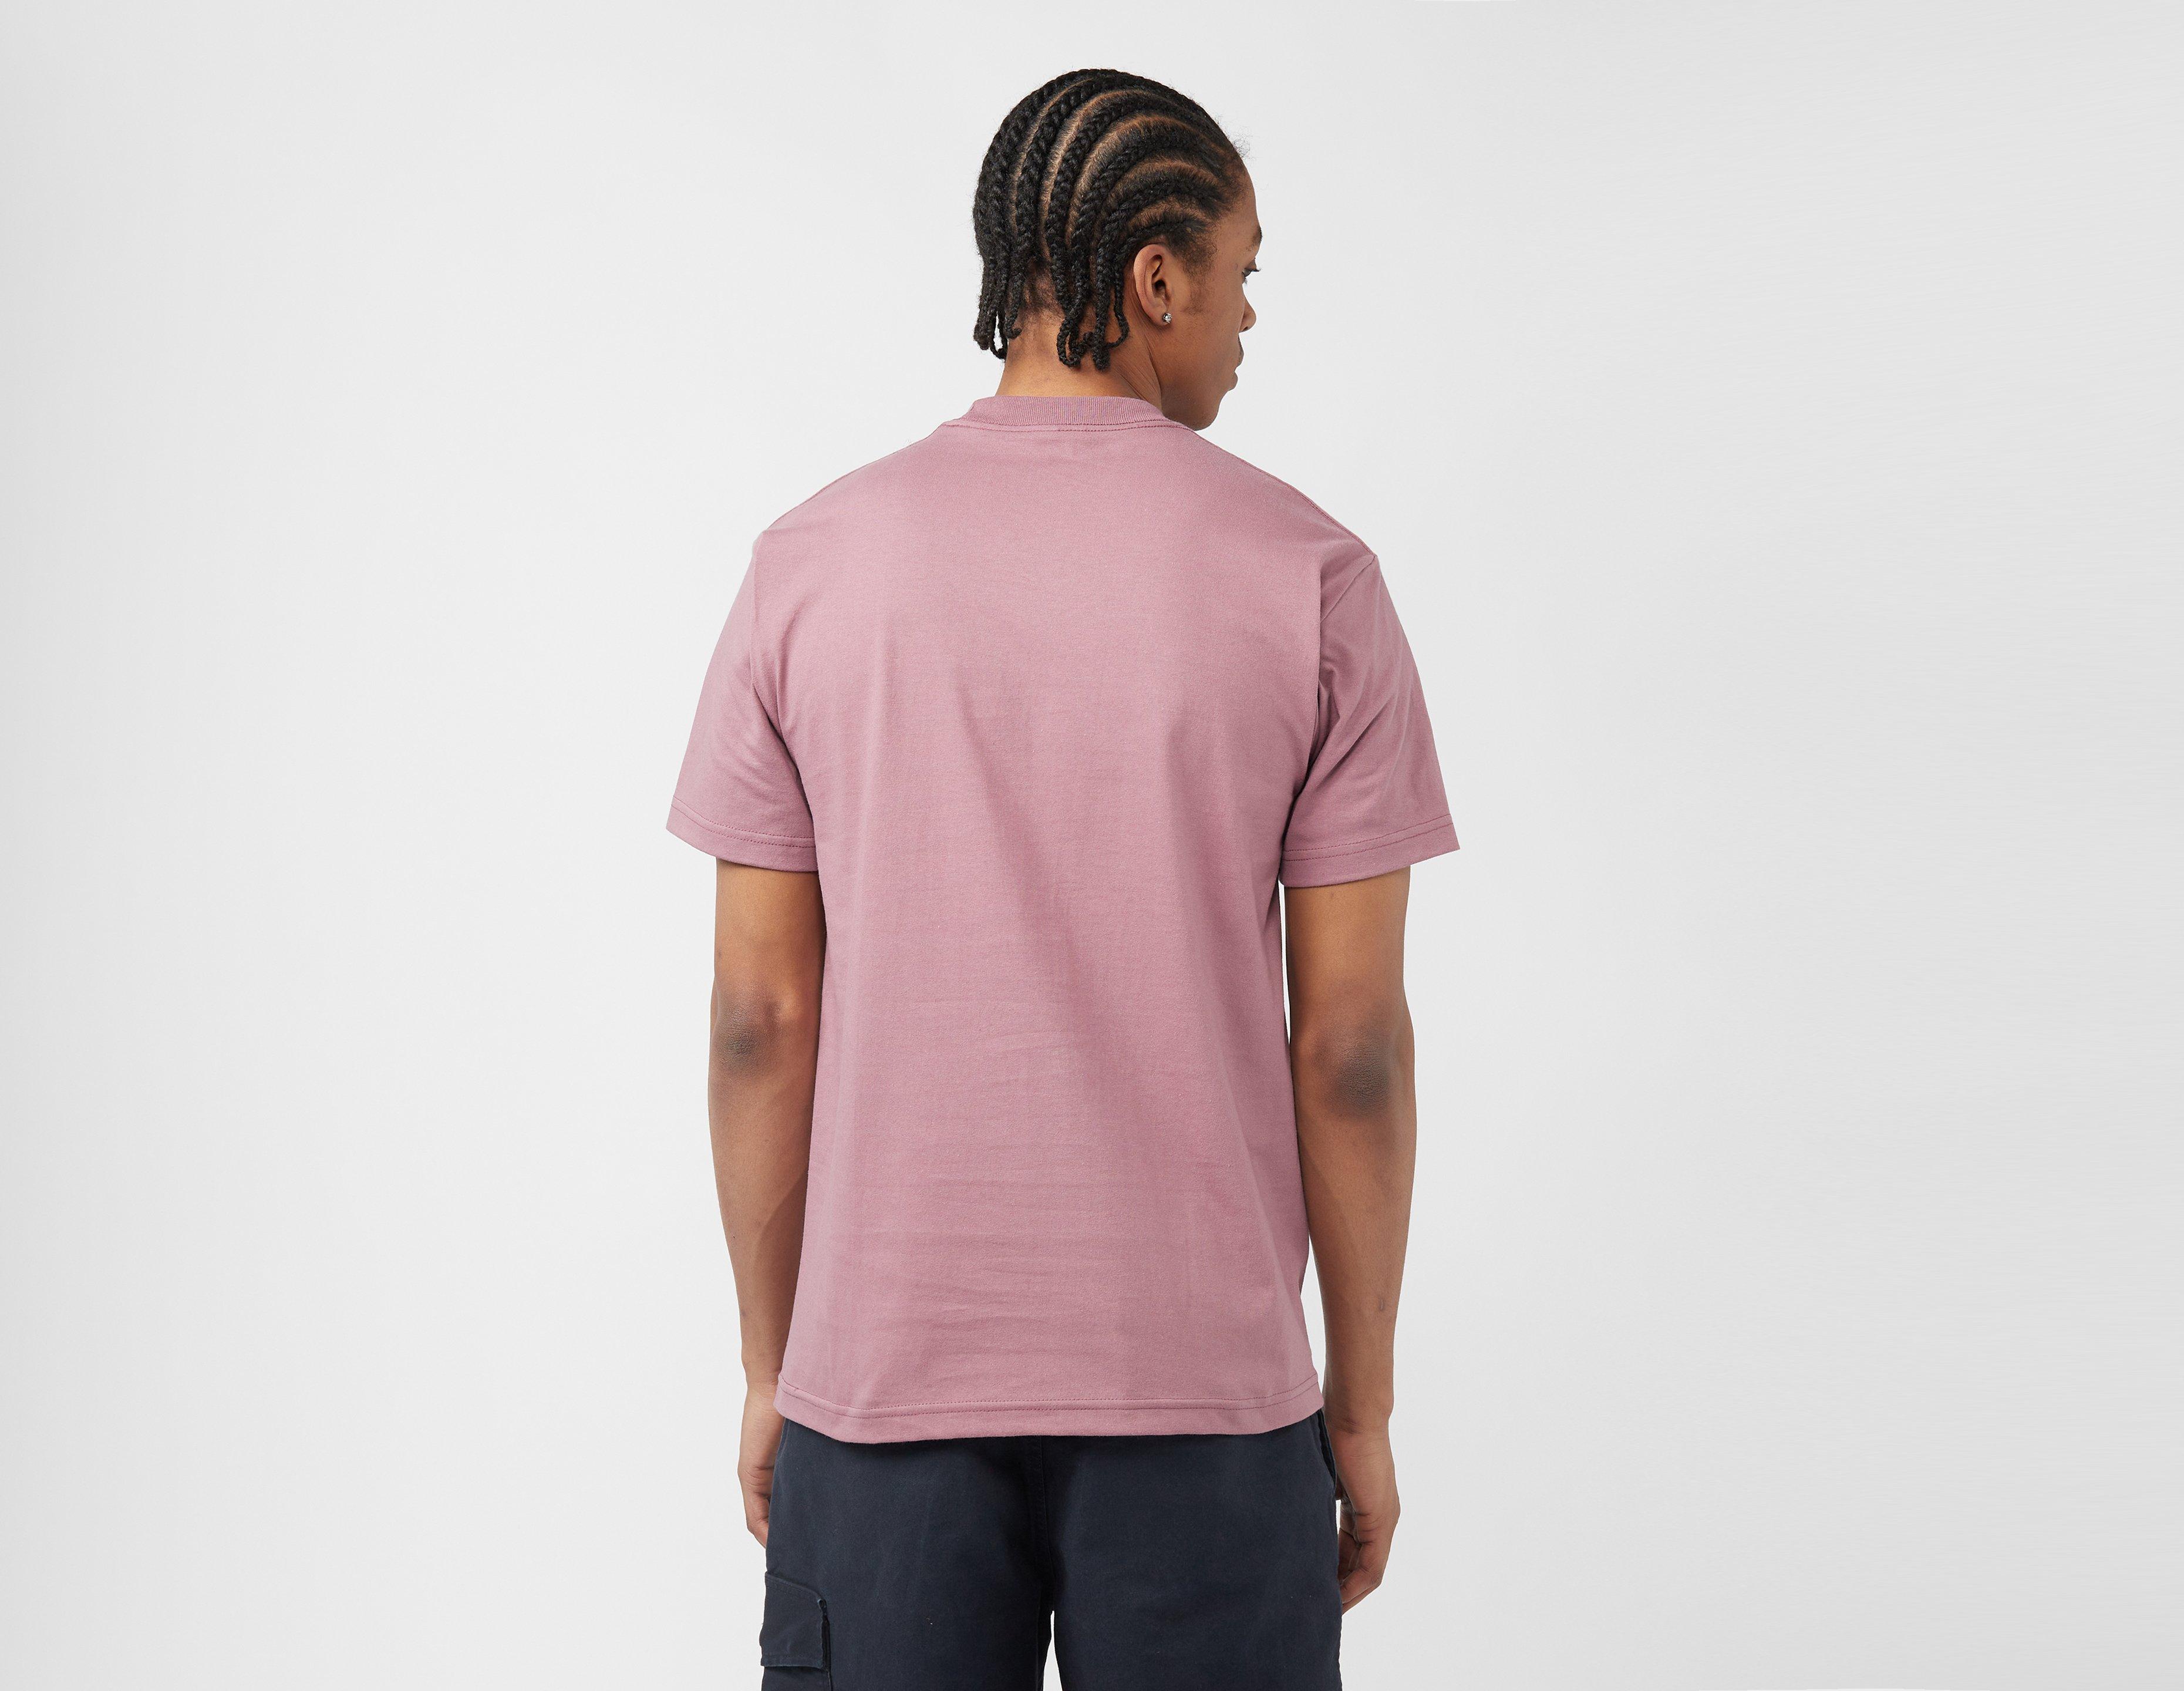 back unchained Huf shirt - Show black t- Shirt wash print Pink Best Healthdesign? T acid In in - |